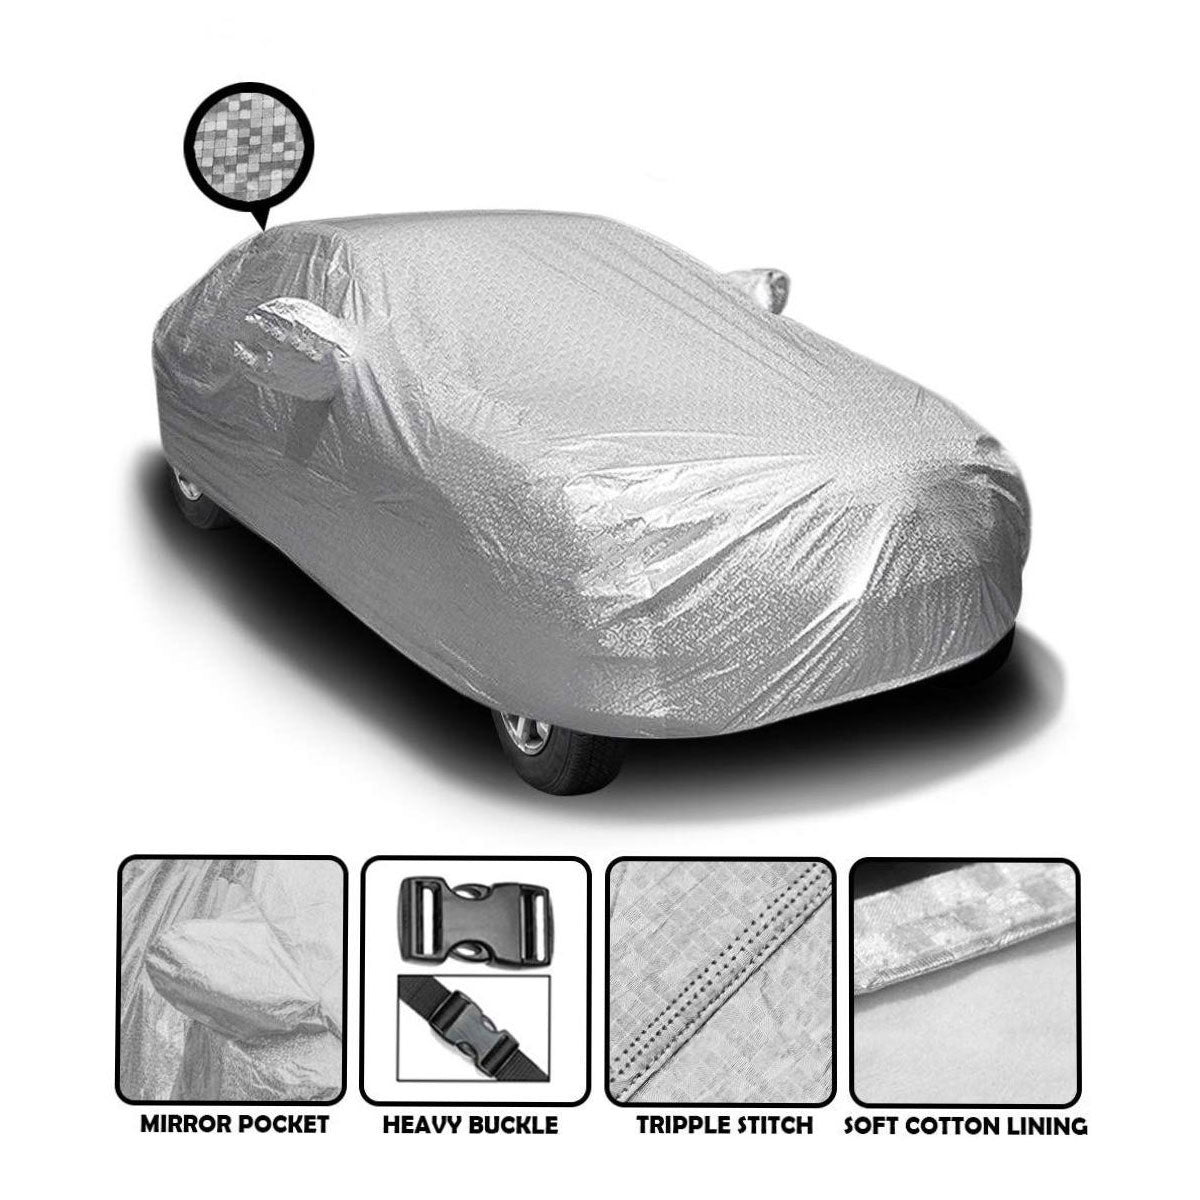 Oshotto Spyro Silver Anti Reflective, dustproof and Water Proof Car Body Cover with Mirror Pockets For Lexus NX